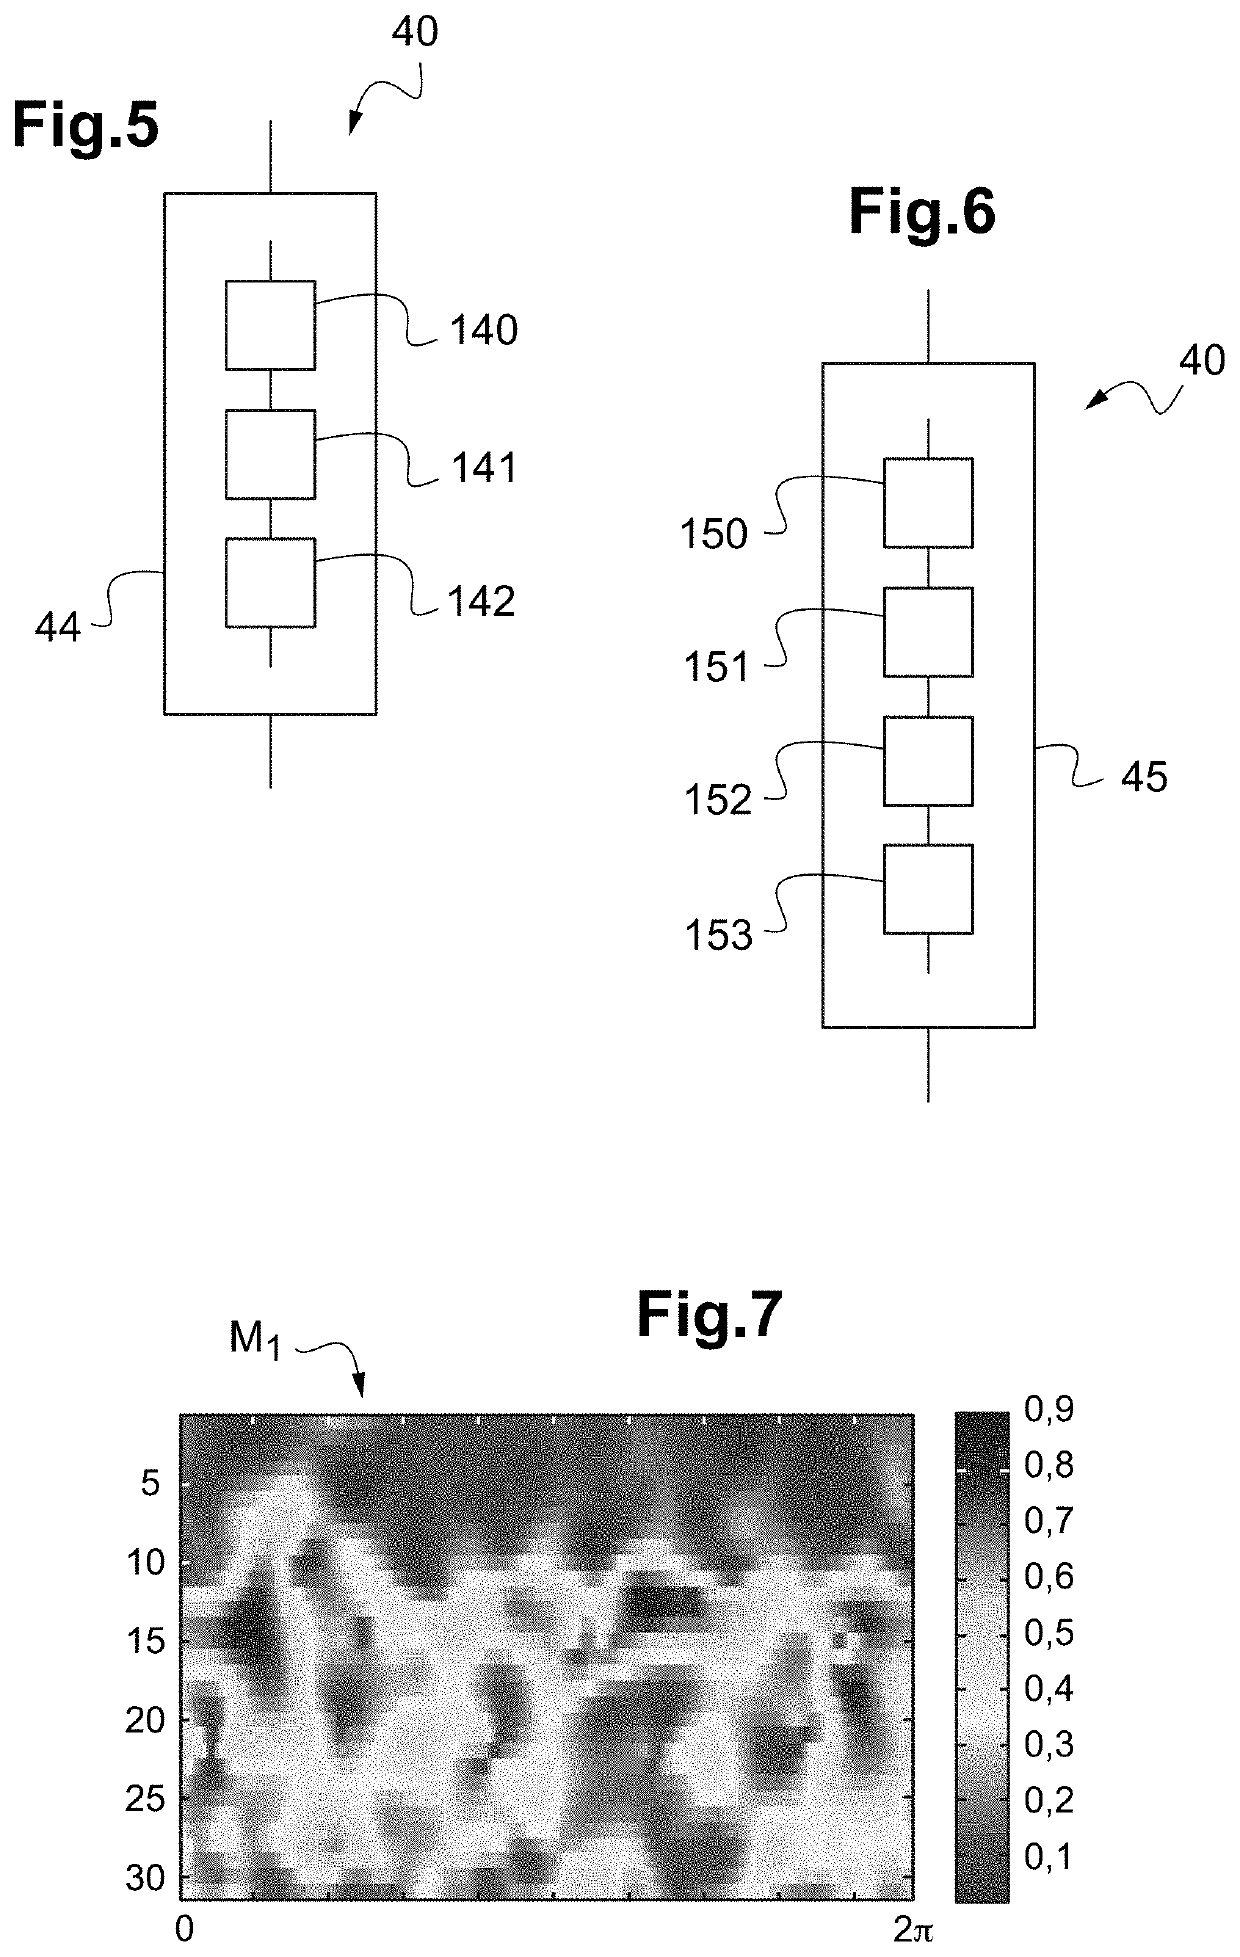 Method for monitoring and detecting the formation of degradation in at least one moving part of a rotating mechanism and associated system